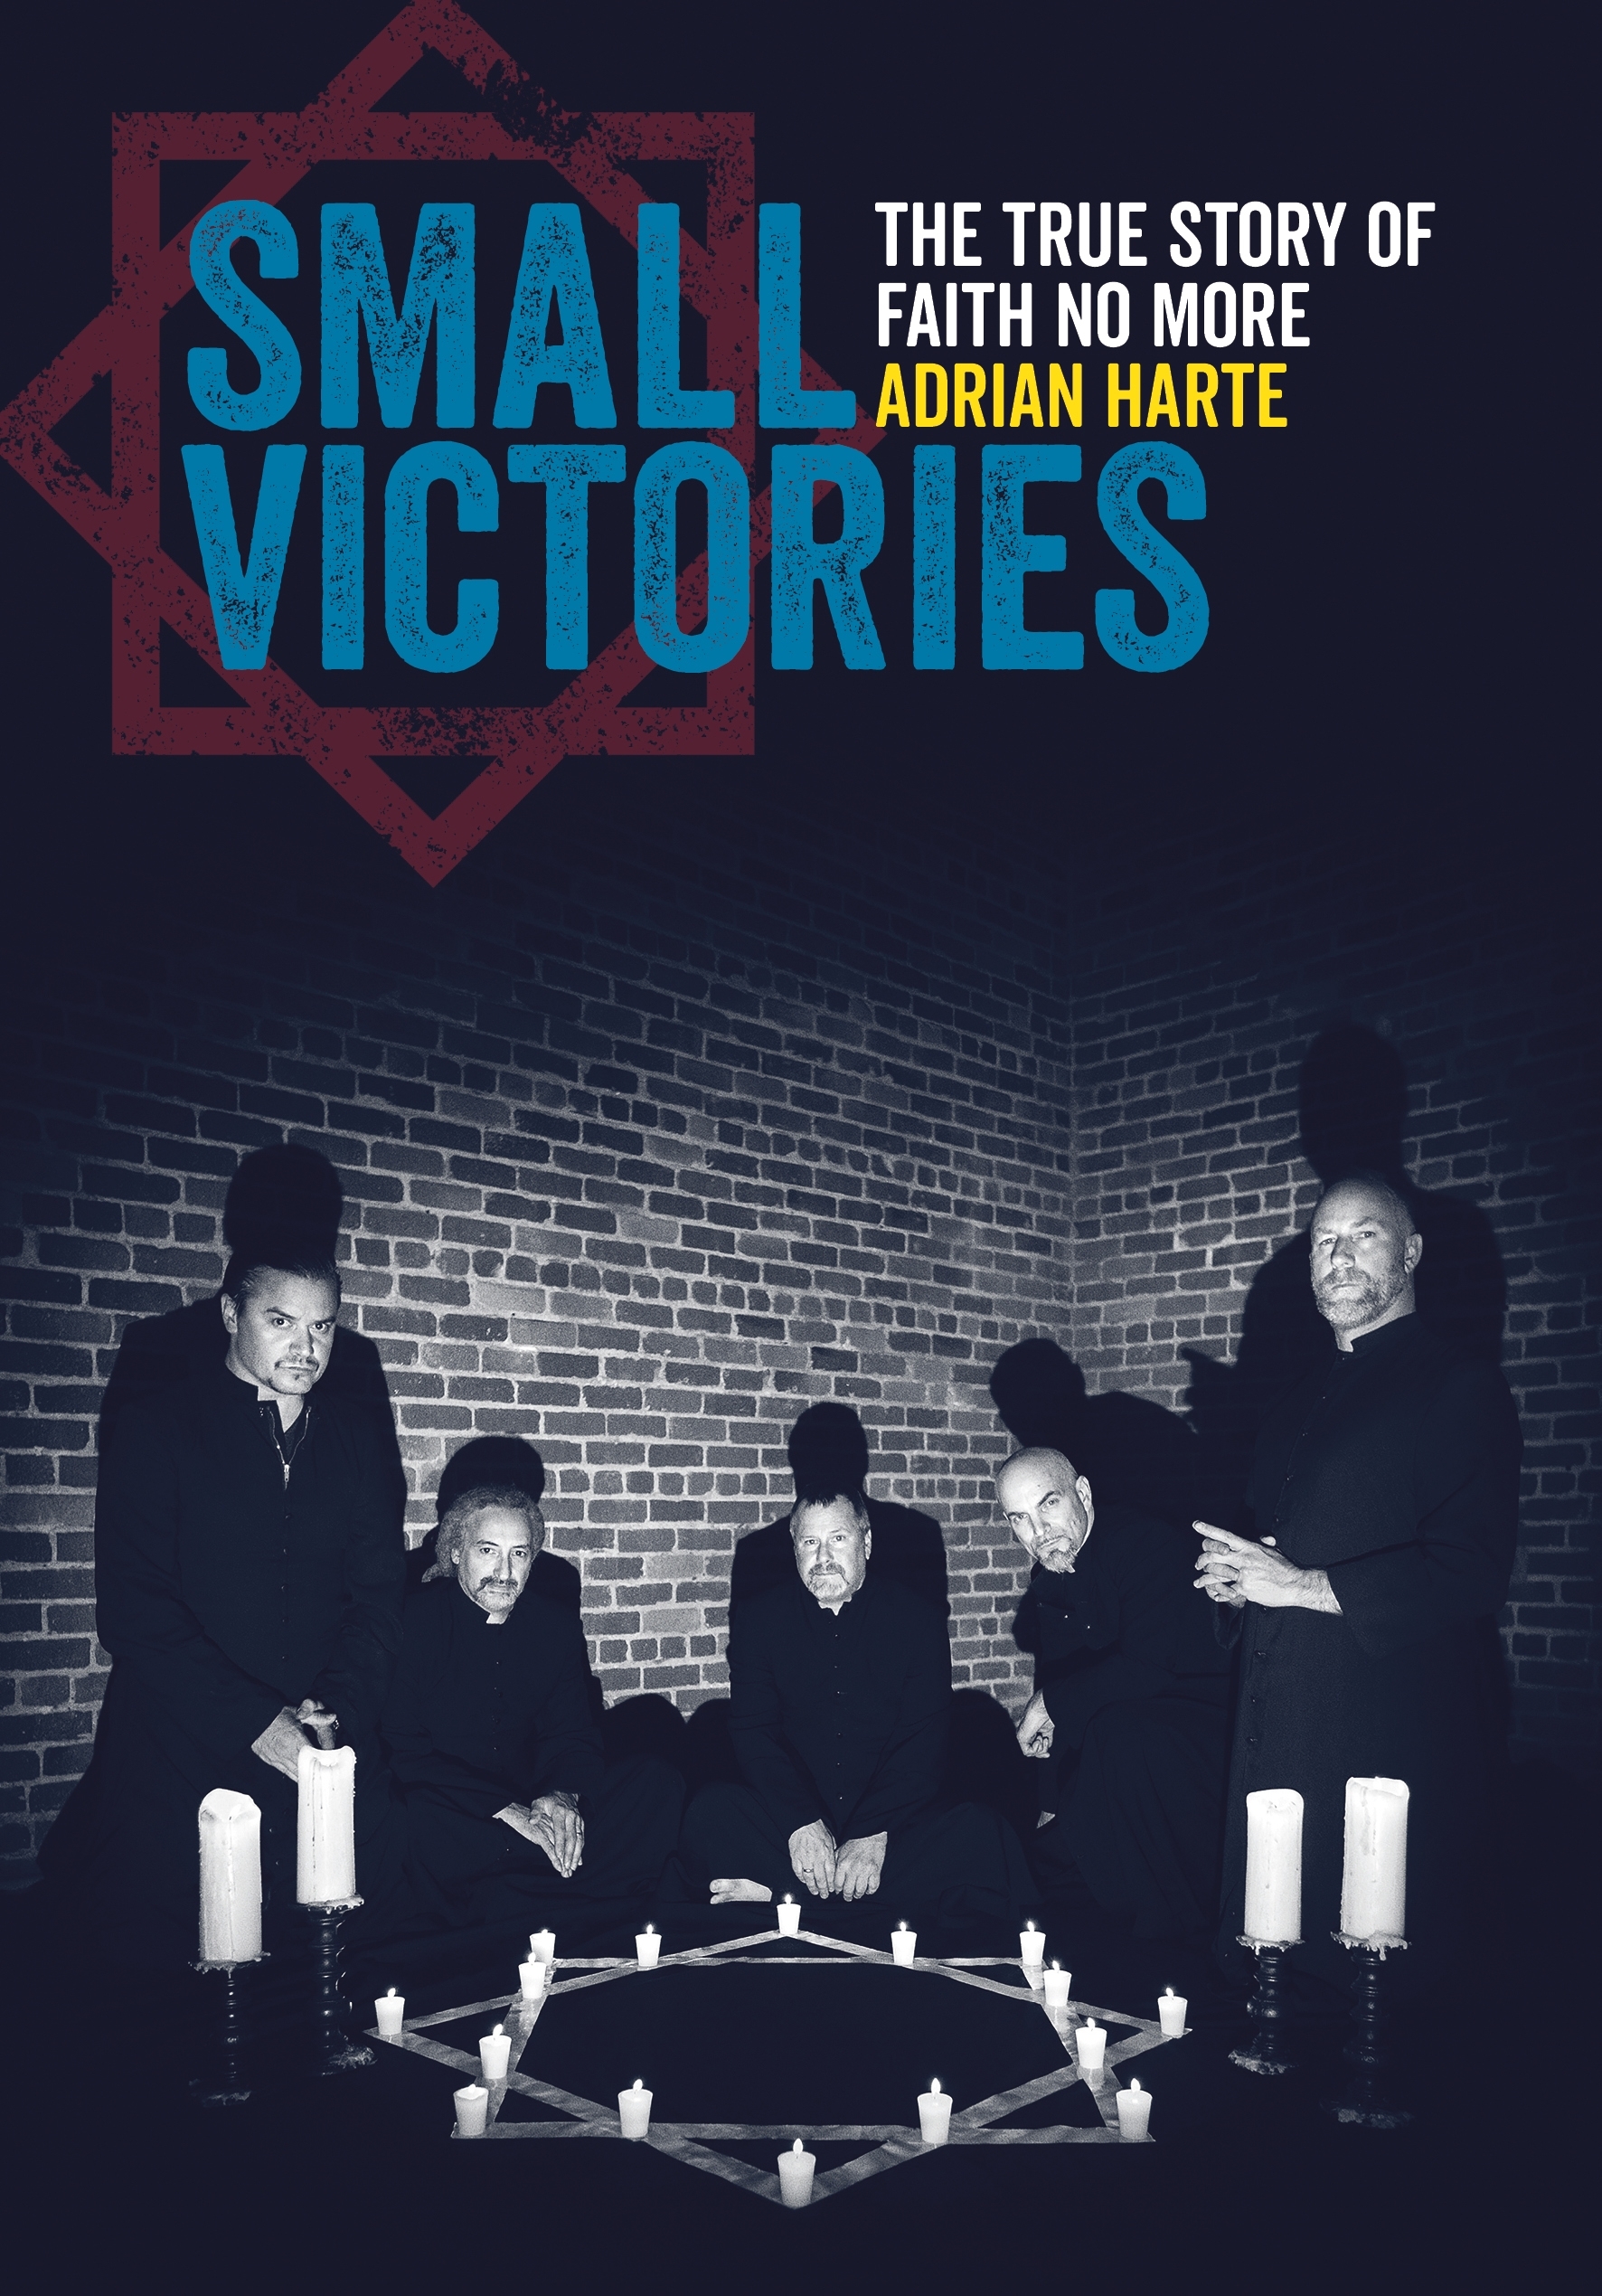 FAITH NO MORE BOOK, “SMALL VICTORIES: THE TRUE STORY OF FAITH NO MORE” (SEPT. 12, JAWBONE PRESS), IMPRESSES BAND WITH LEVEL OF DETAIL AND DEPTH ​   　 